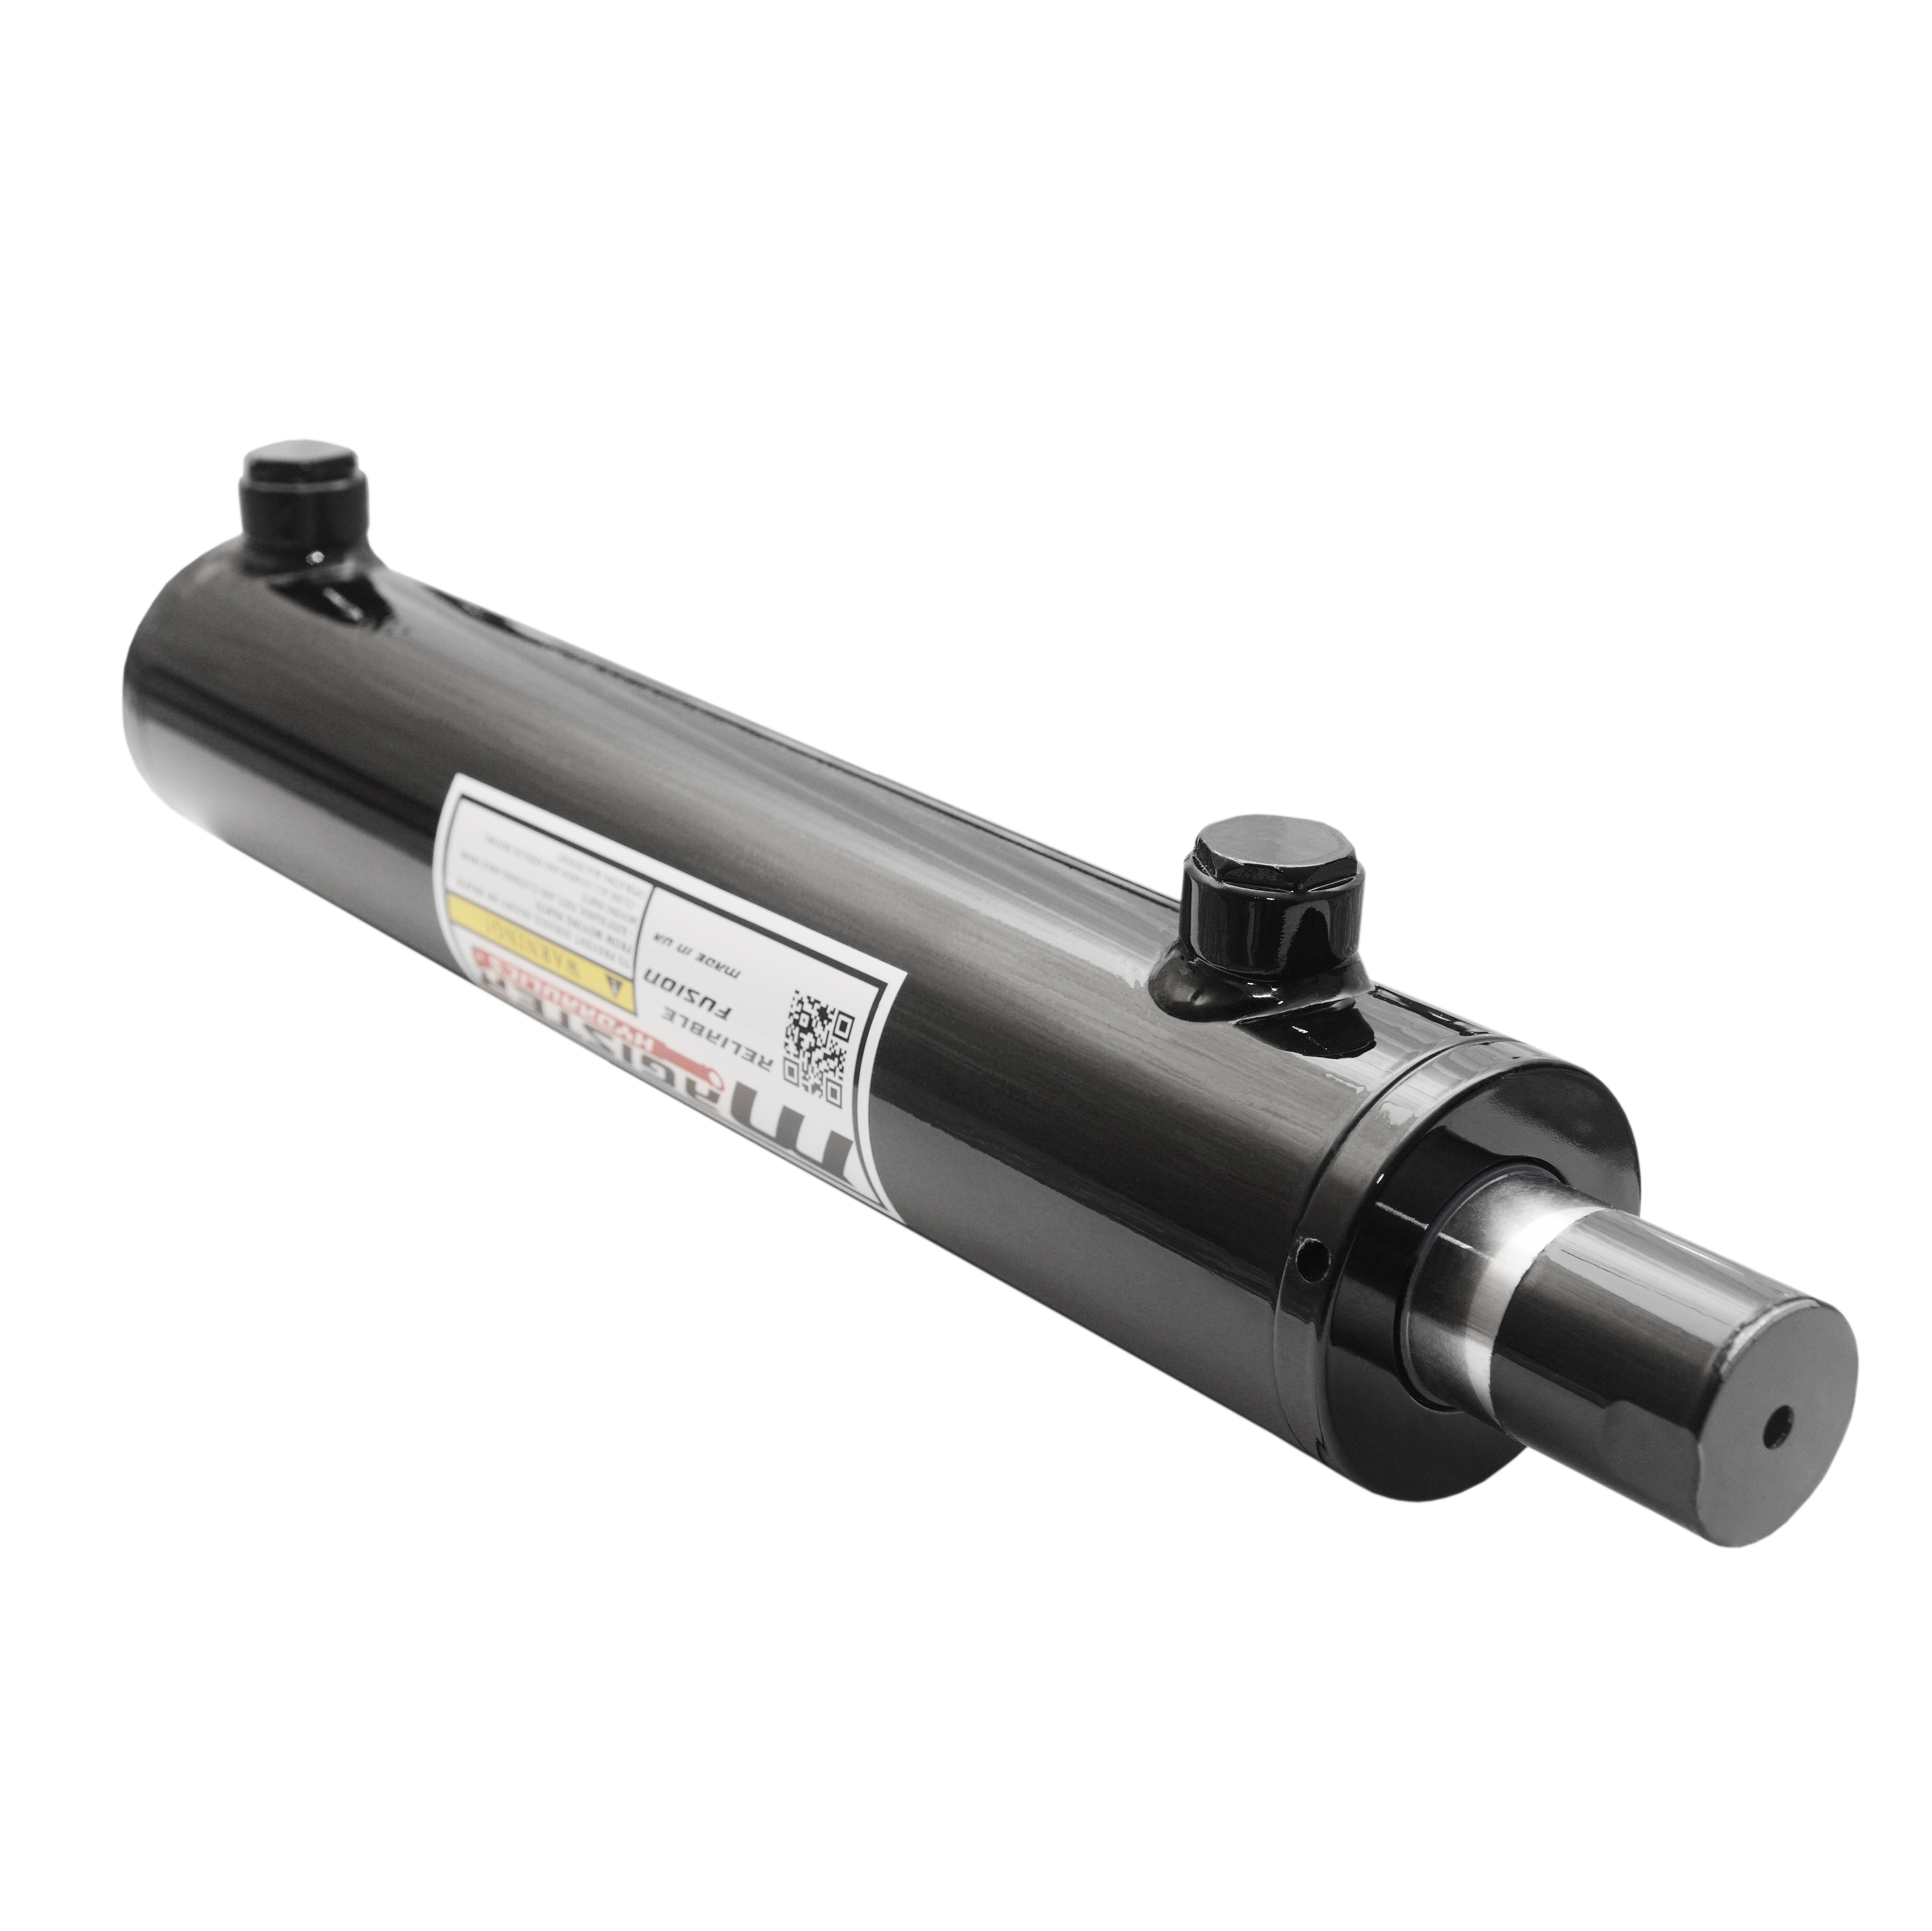 2 bore x 12 stroke hydraulic cylinder, welded universal double acting cylinder | Magister Hydraulics